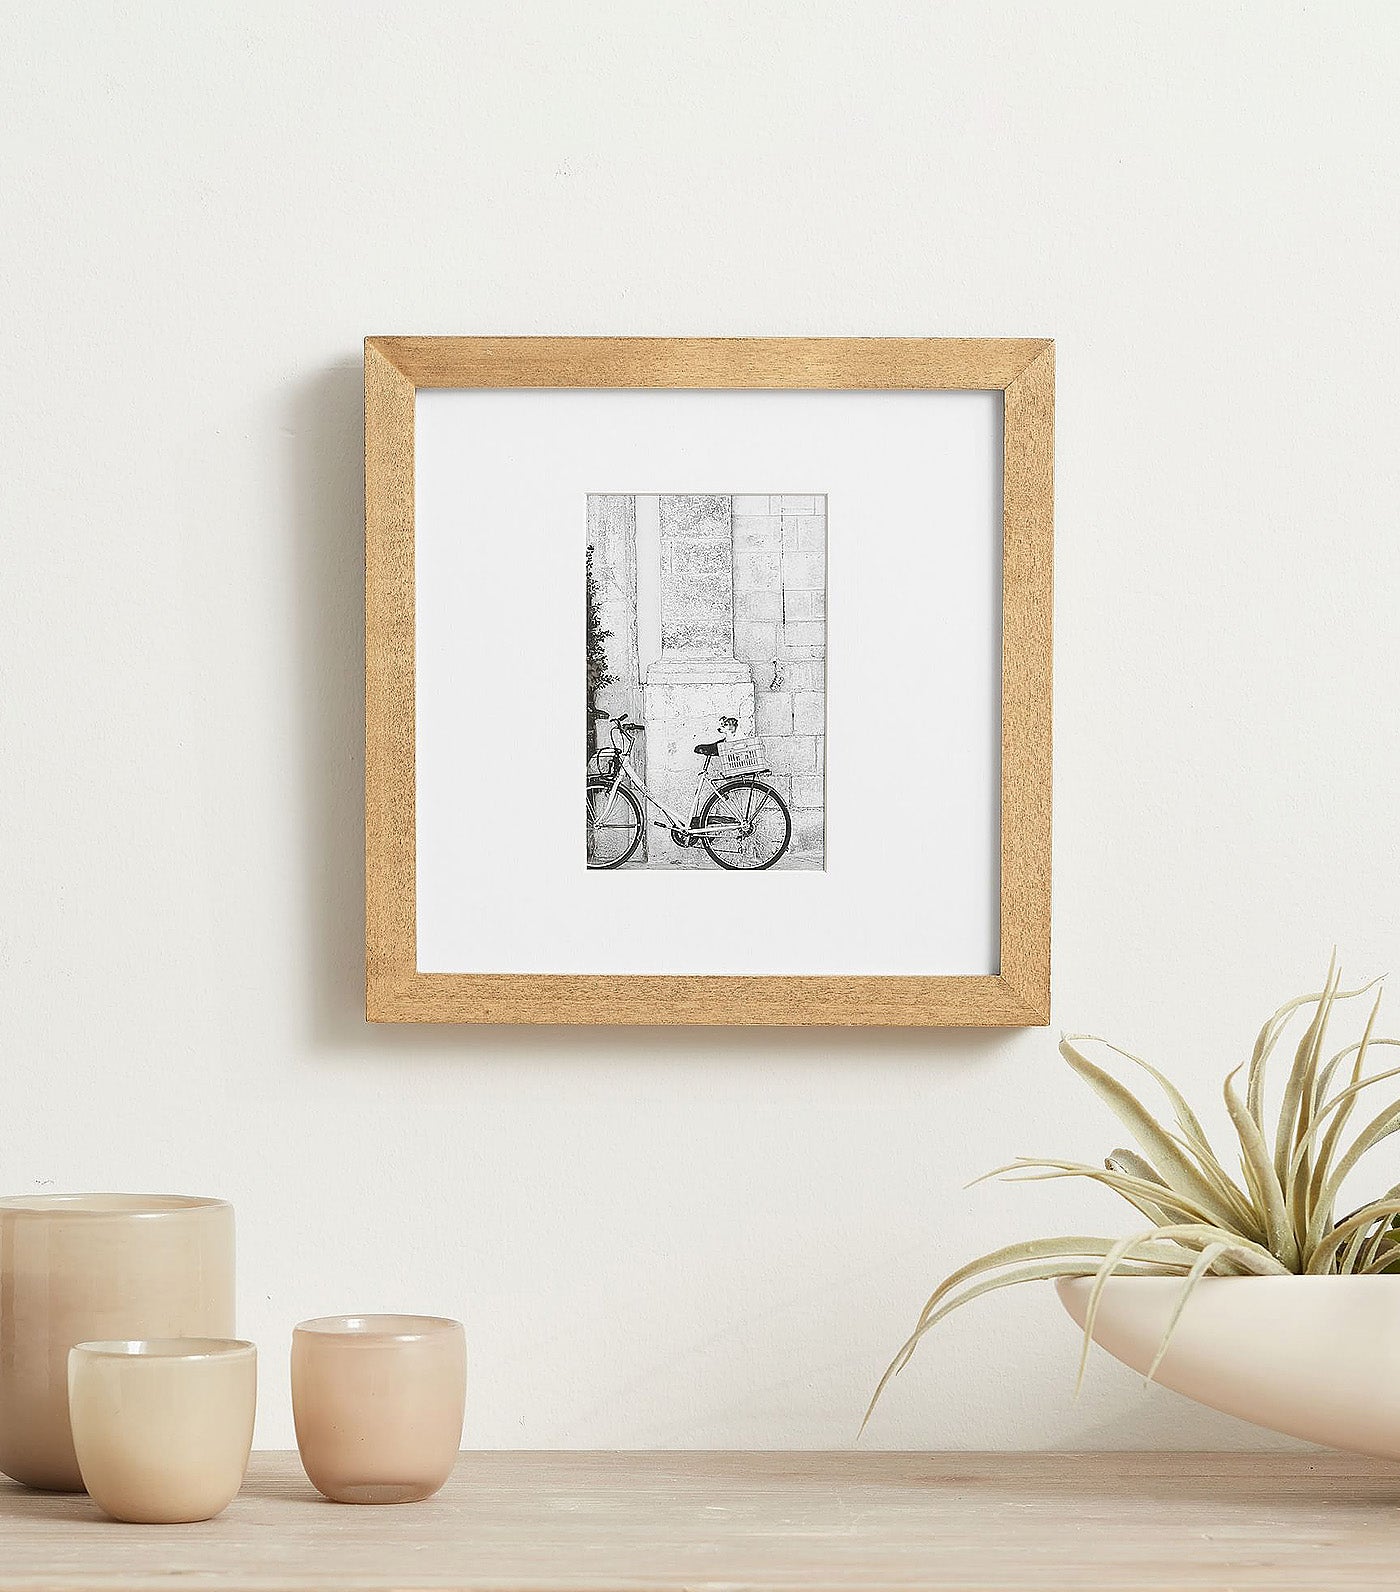 Pottery Barn Wood Gallery Frames - Natural